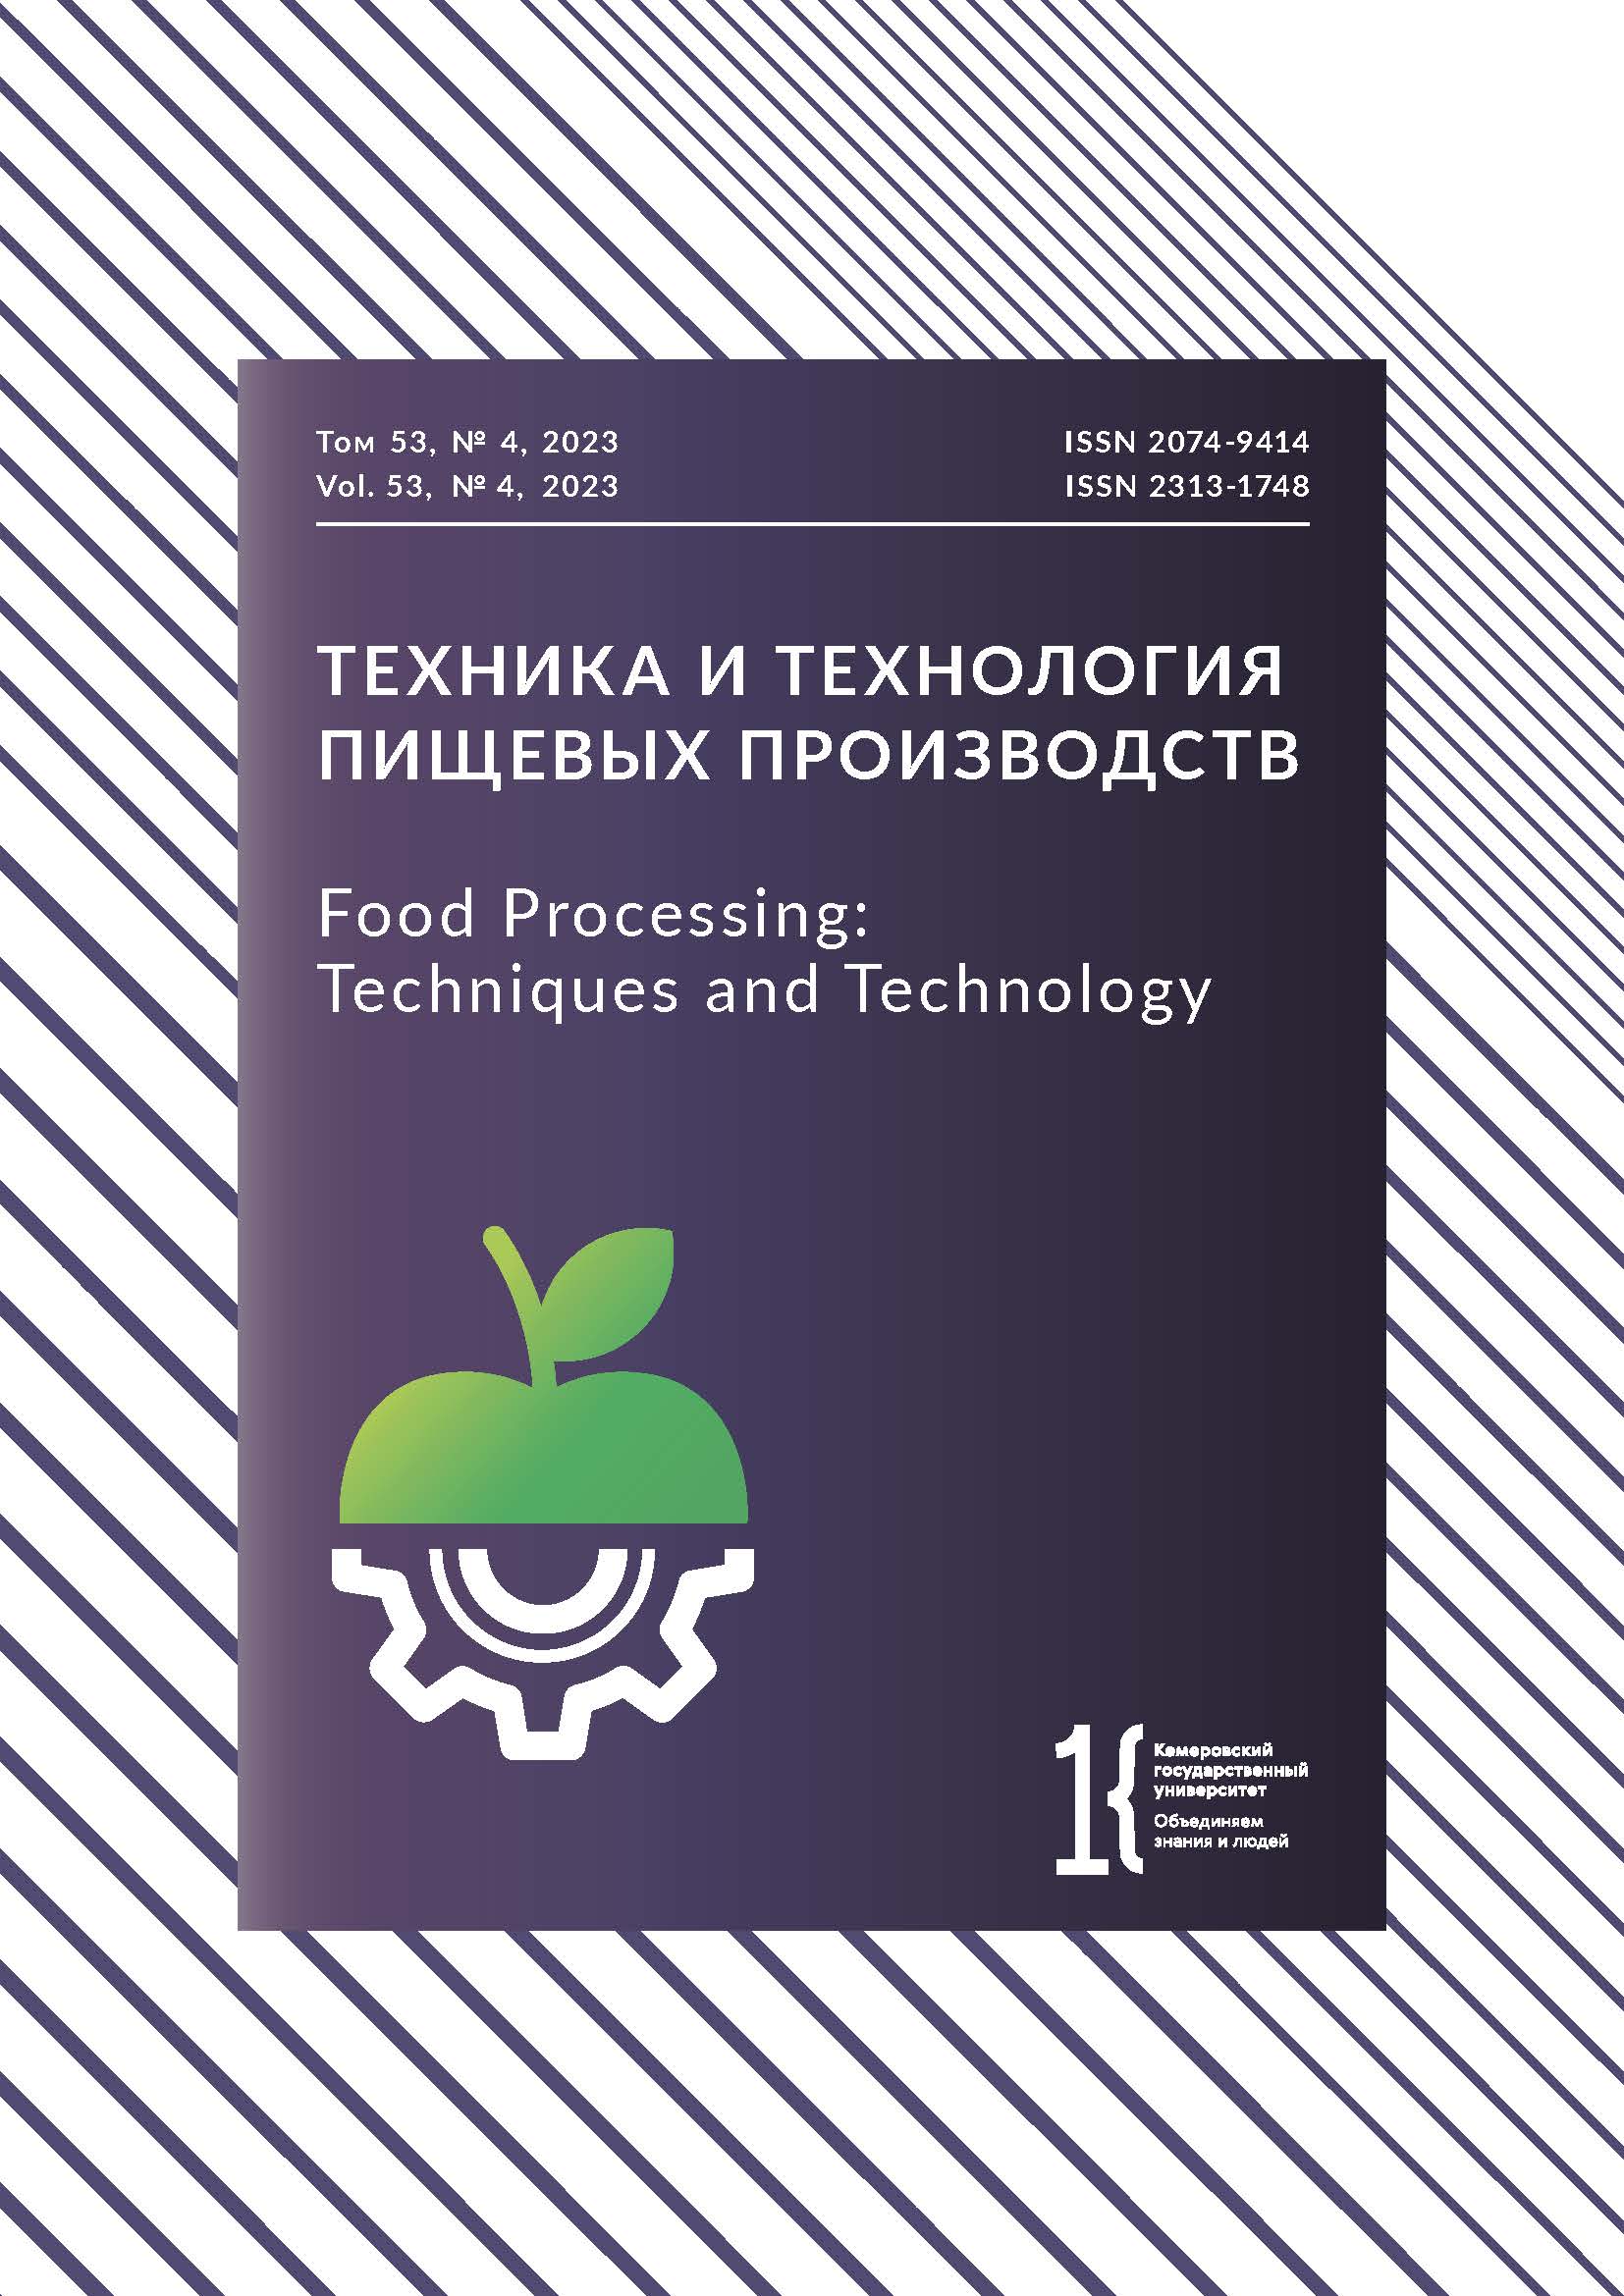                         Dairy Production in the Chuvash Republic: Success Factor Analysis
            